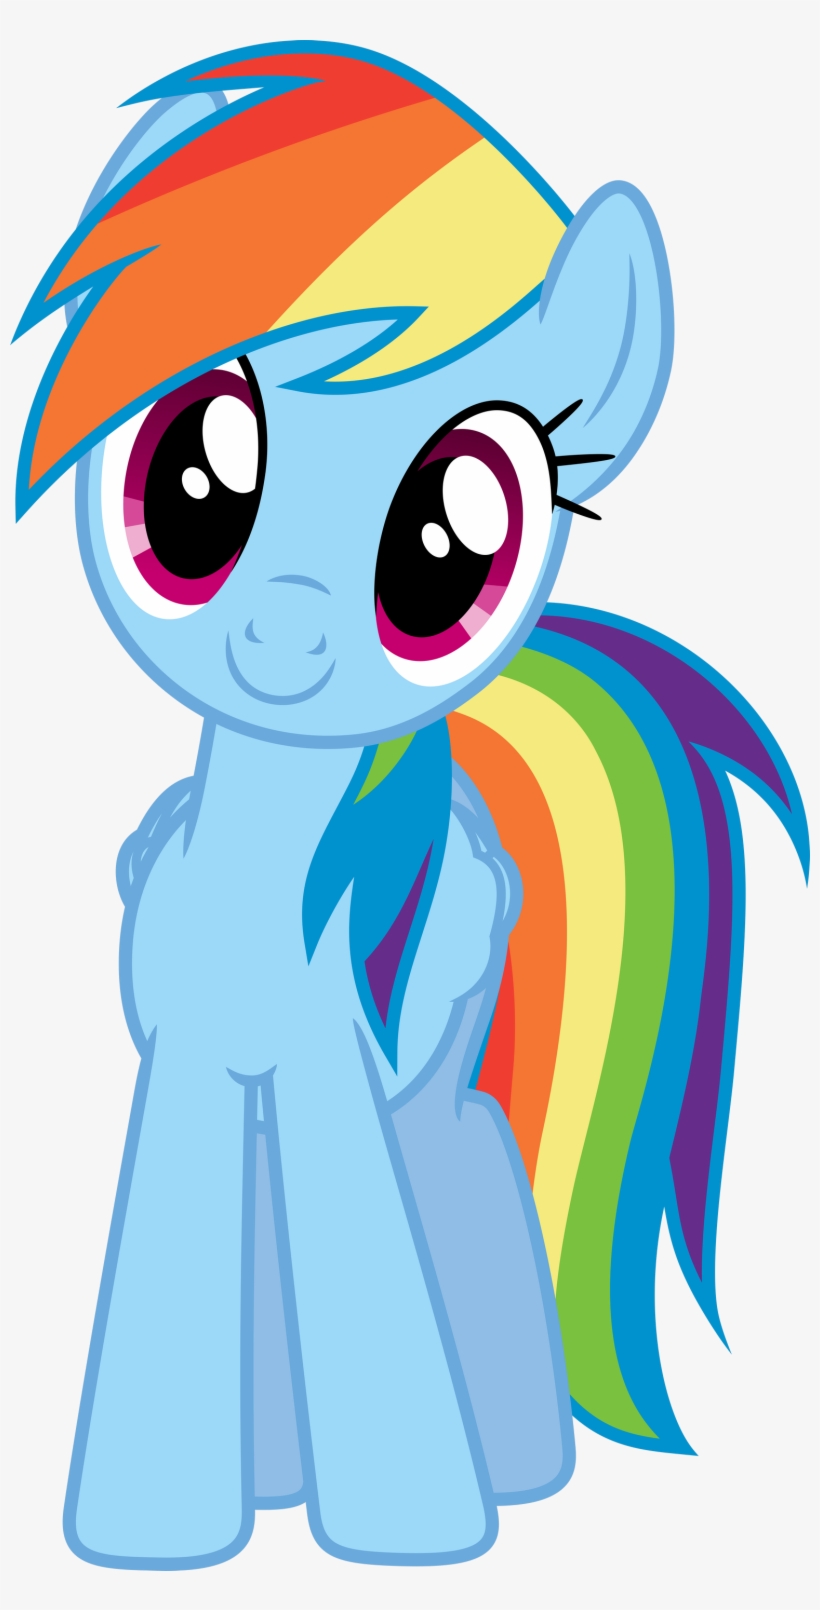 Artwork Clipart My Little Pony Rainbow - My Little Pony Rainbow Dash Png, transparent png #9629389